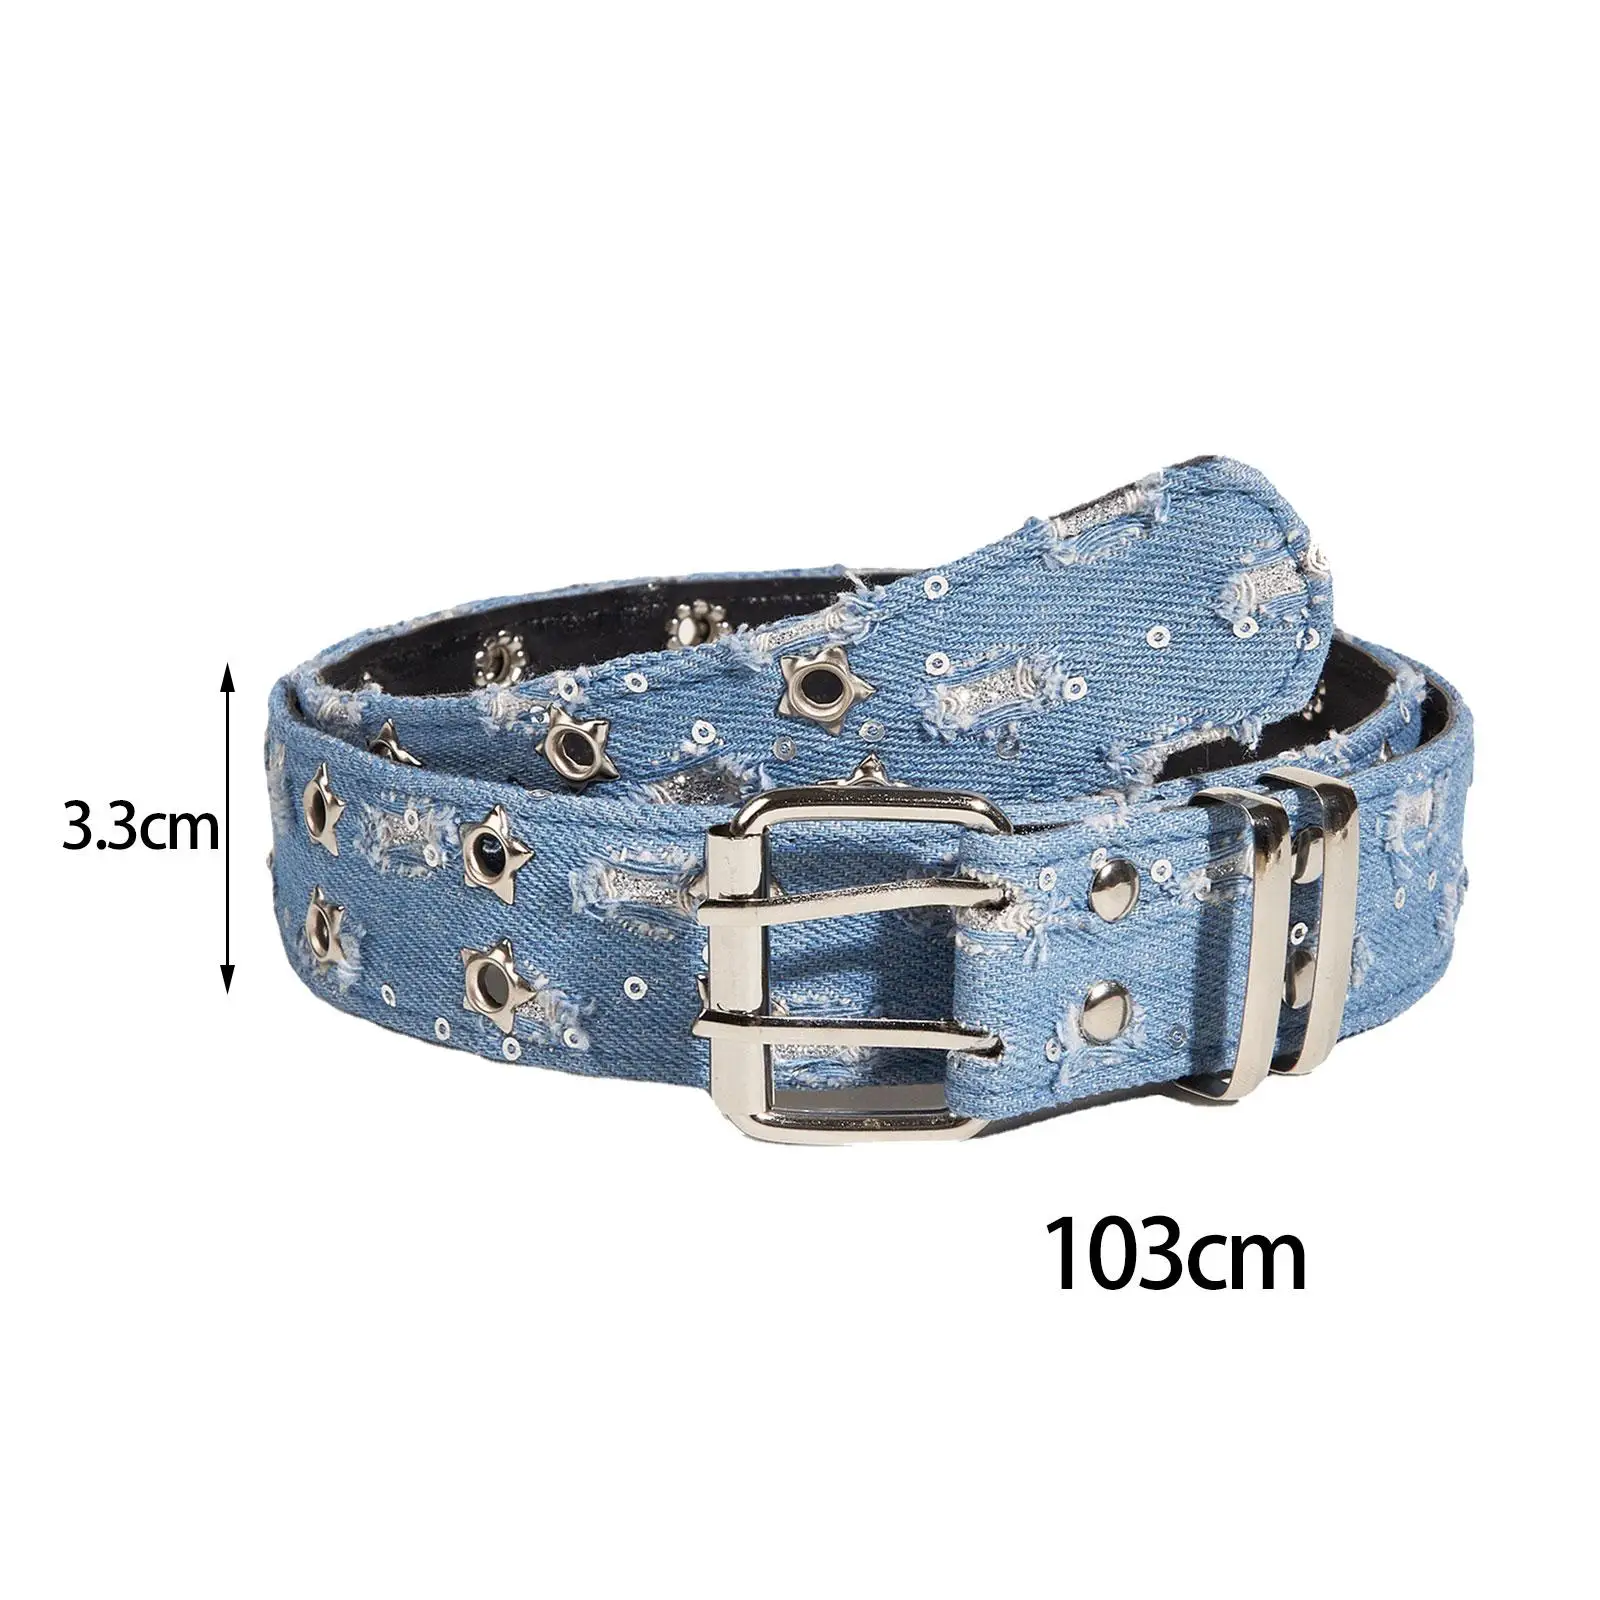 Double Grommet Belt Women Decorative Ladies Double Prong Buckle Trendy Two Hole Wide Belt for Shirts Jeans Dresses Cosplay Club